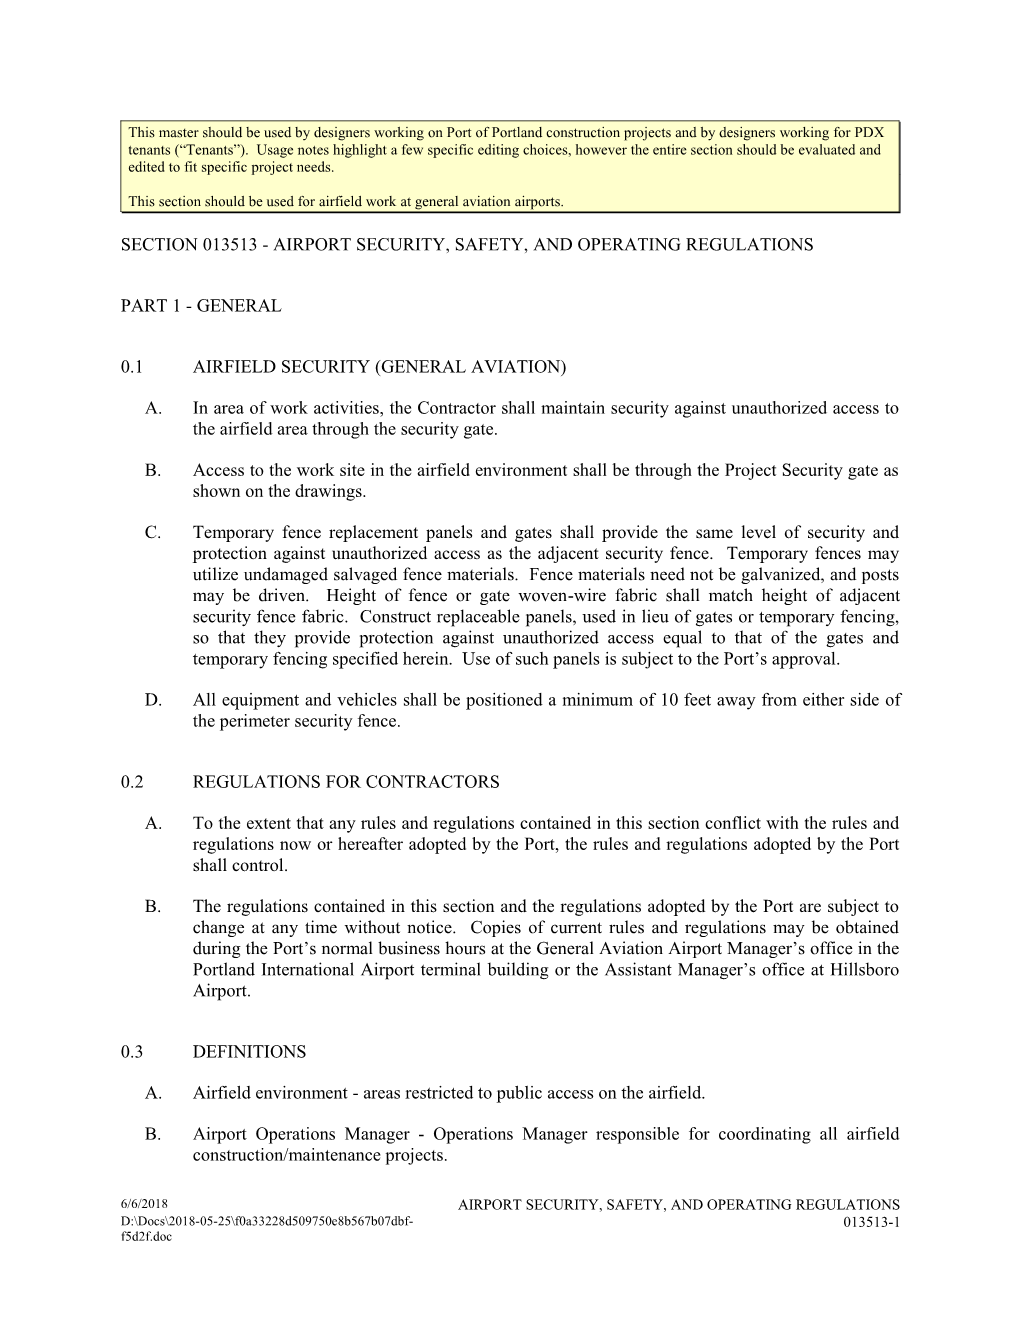 SECTION 013513Ga - AIRPORT SECURITY, SAFETY & OPERATING REGULATIONS (GA)